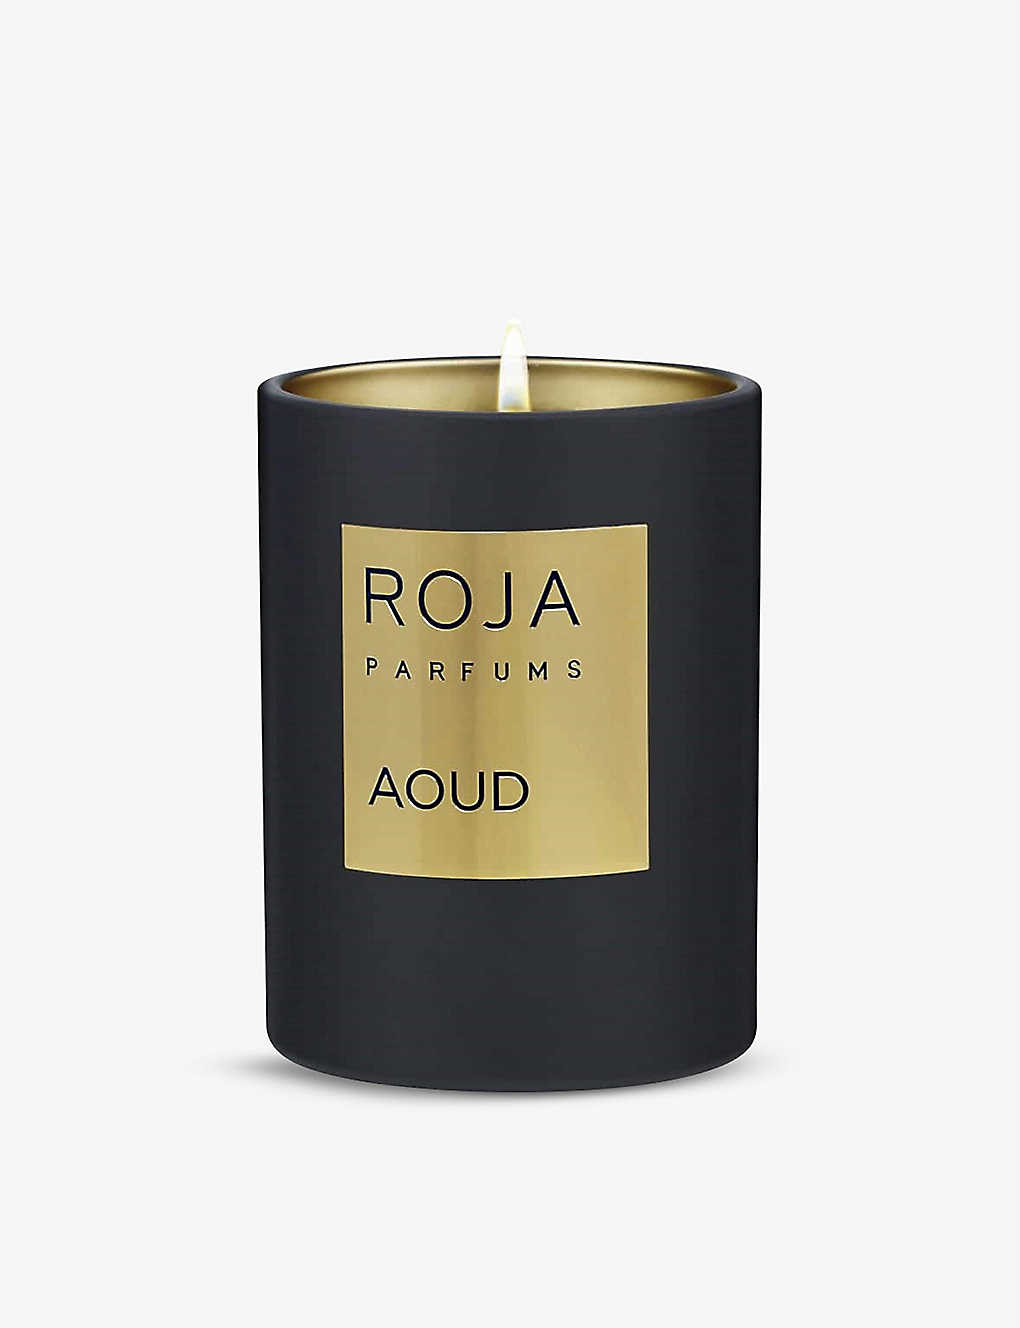 Roja Parfums Aoud Scented Candle 300g